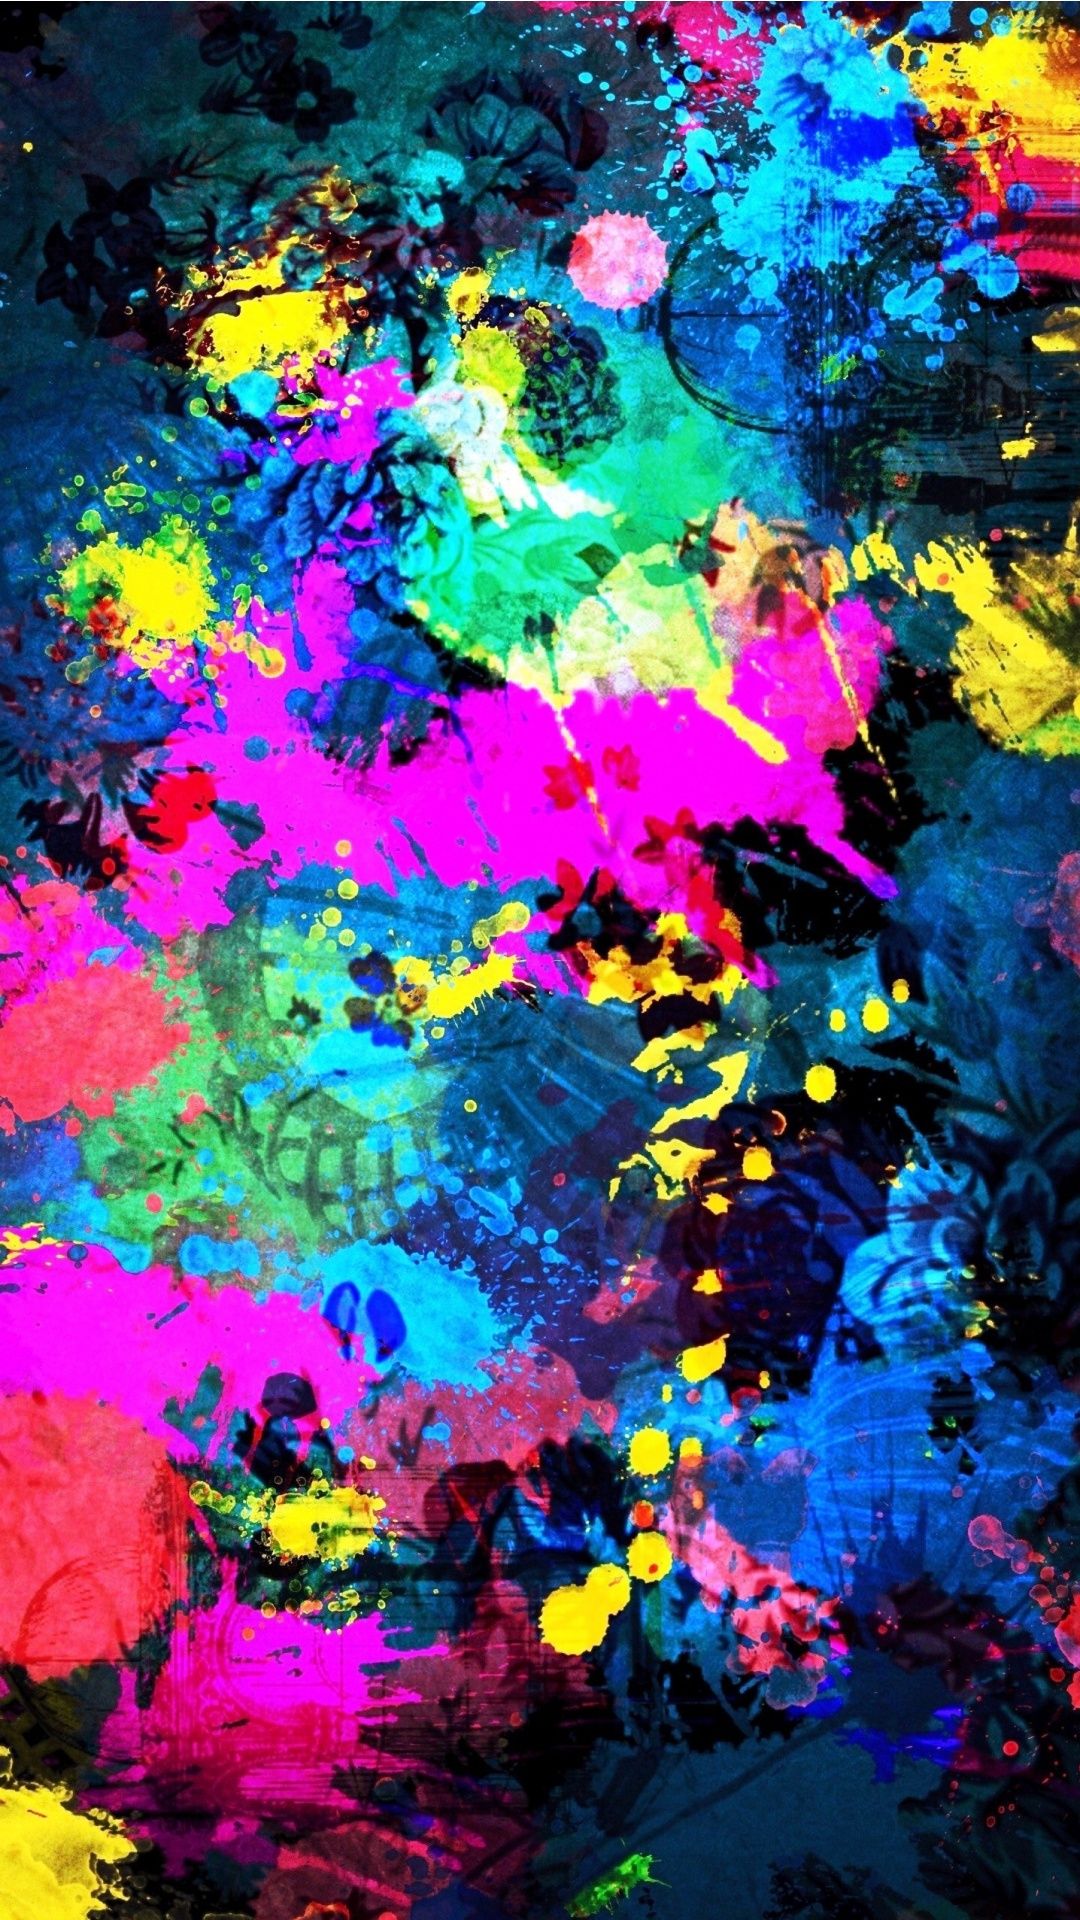 Colourful Background for Phone. iPhone Wallpaper, Phone Wallpaper and Beautiful iPhone Wallpaper